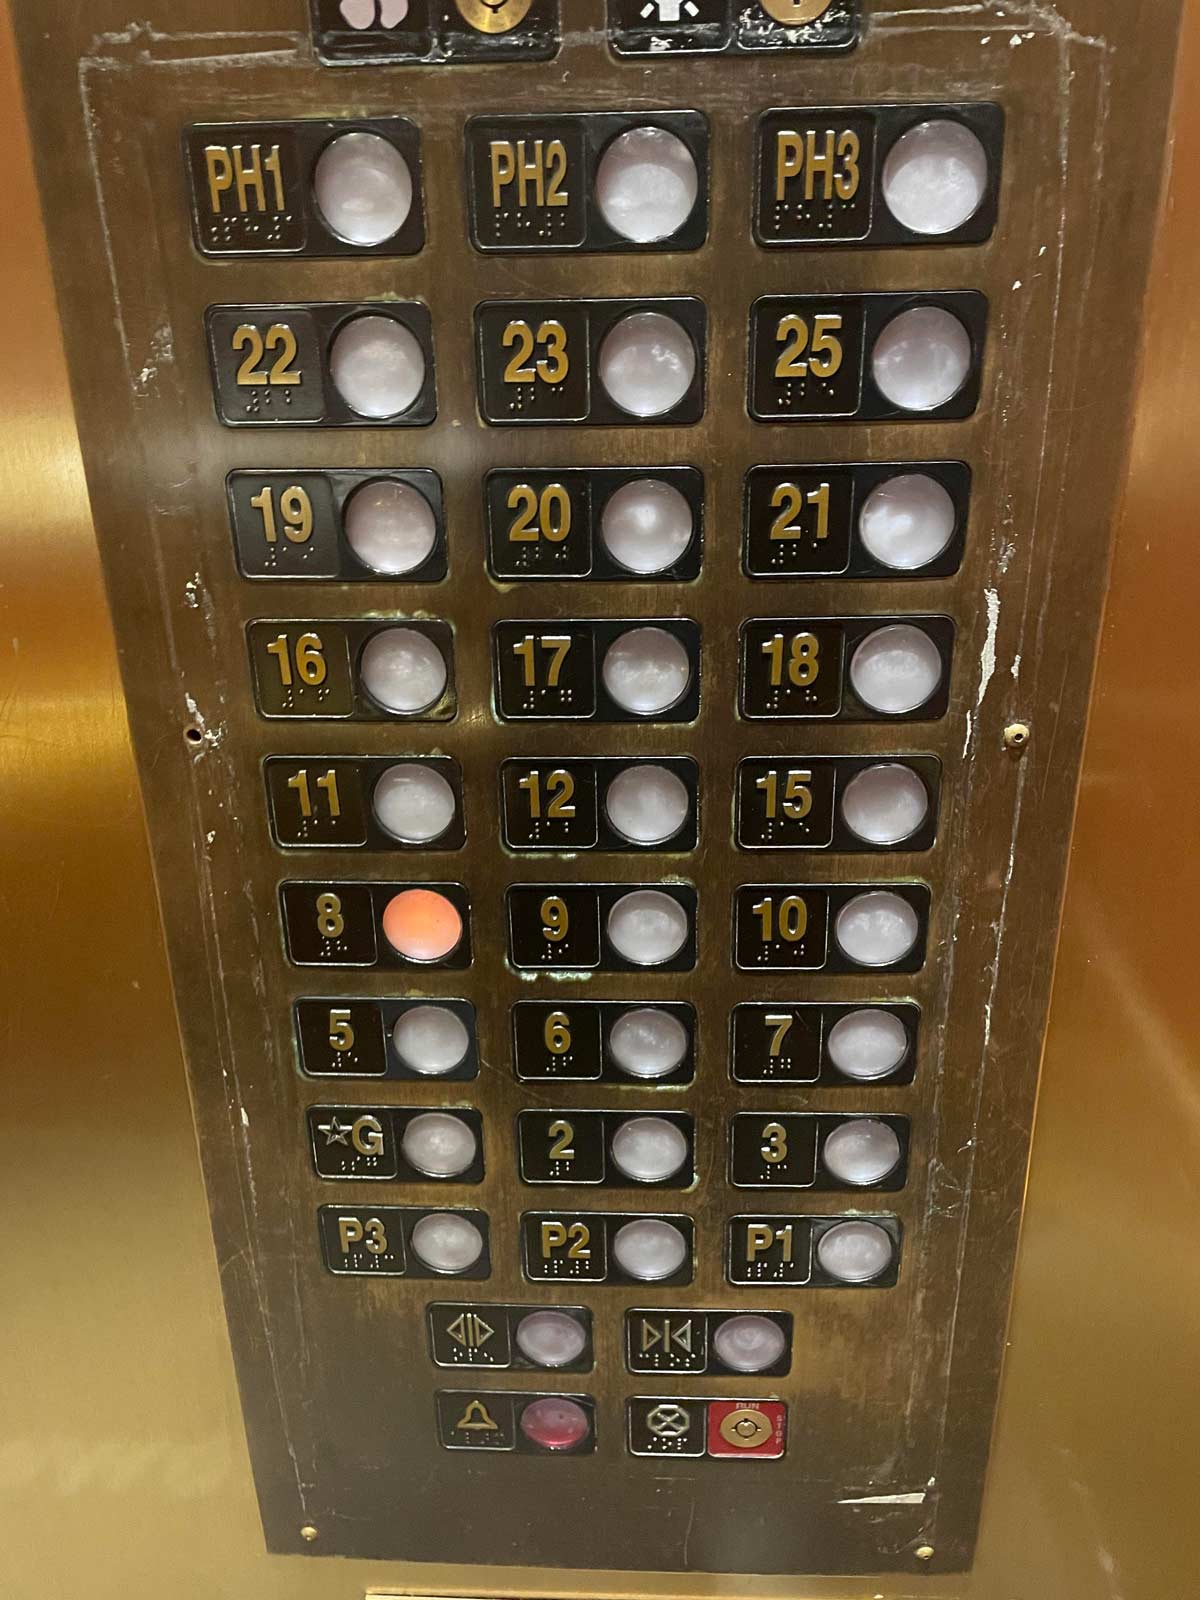 Either the person who made this elevator can’t count, or there are more unlucky numbers than I thought..